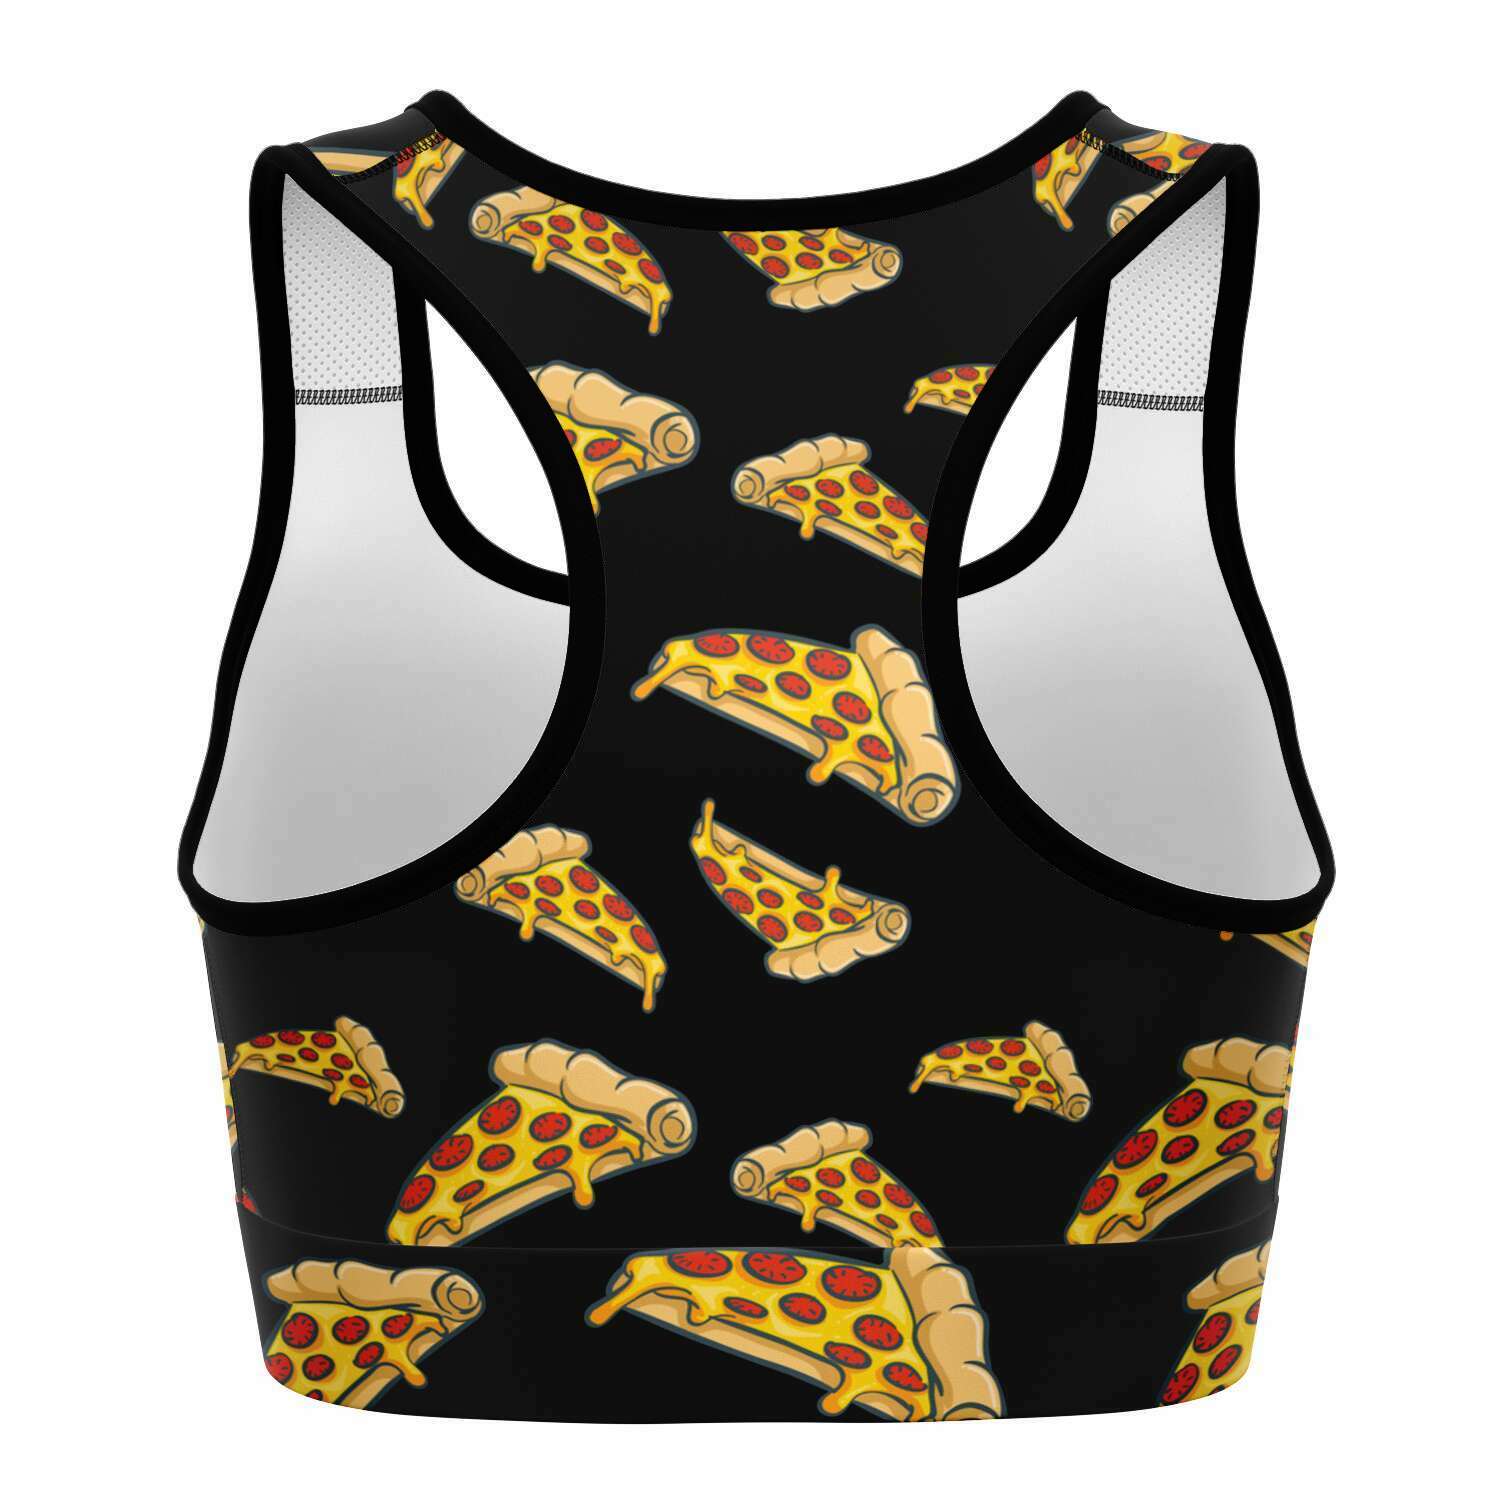 Women's Late Night Hot Pepperoni Pizza Party Athletic Sports Bra Back